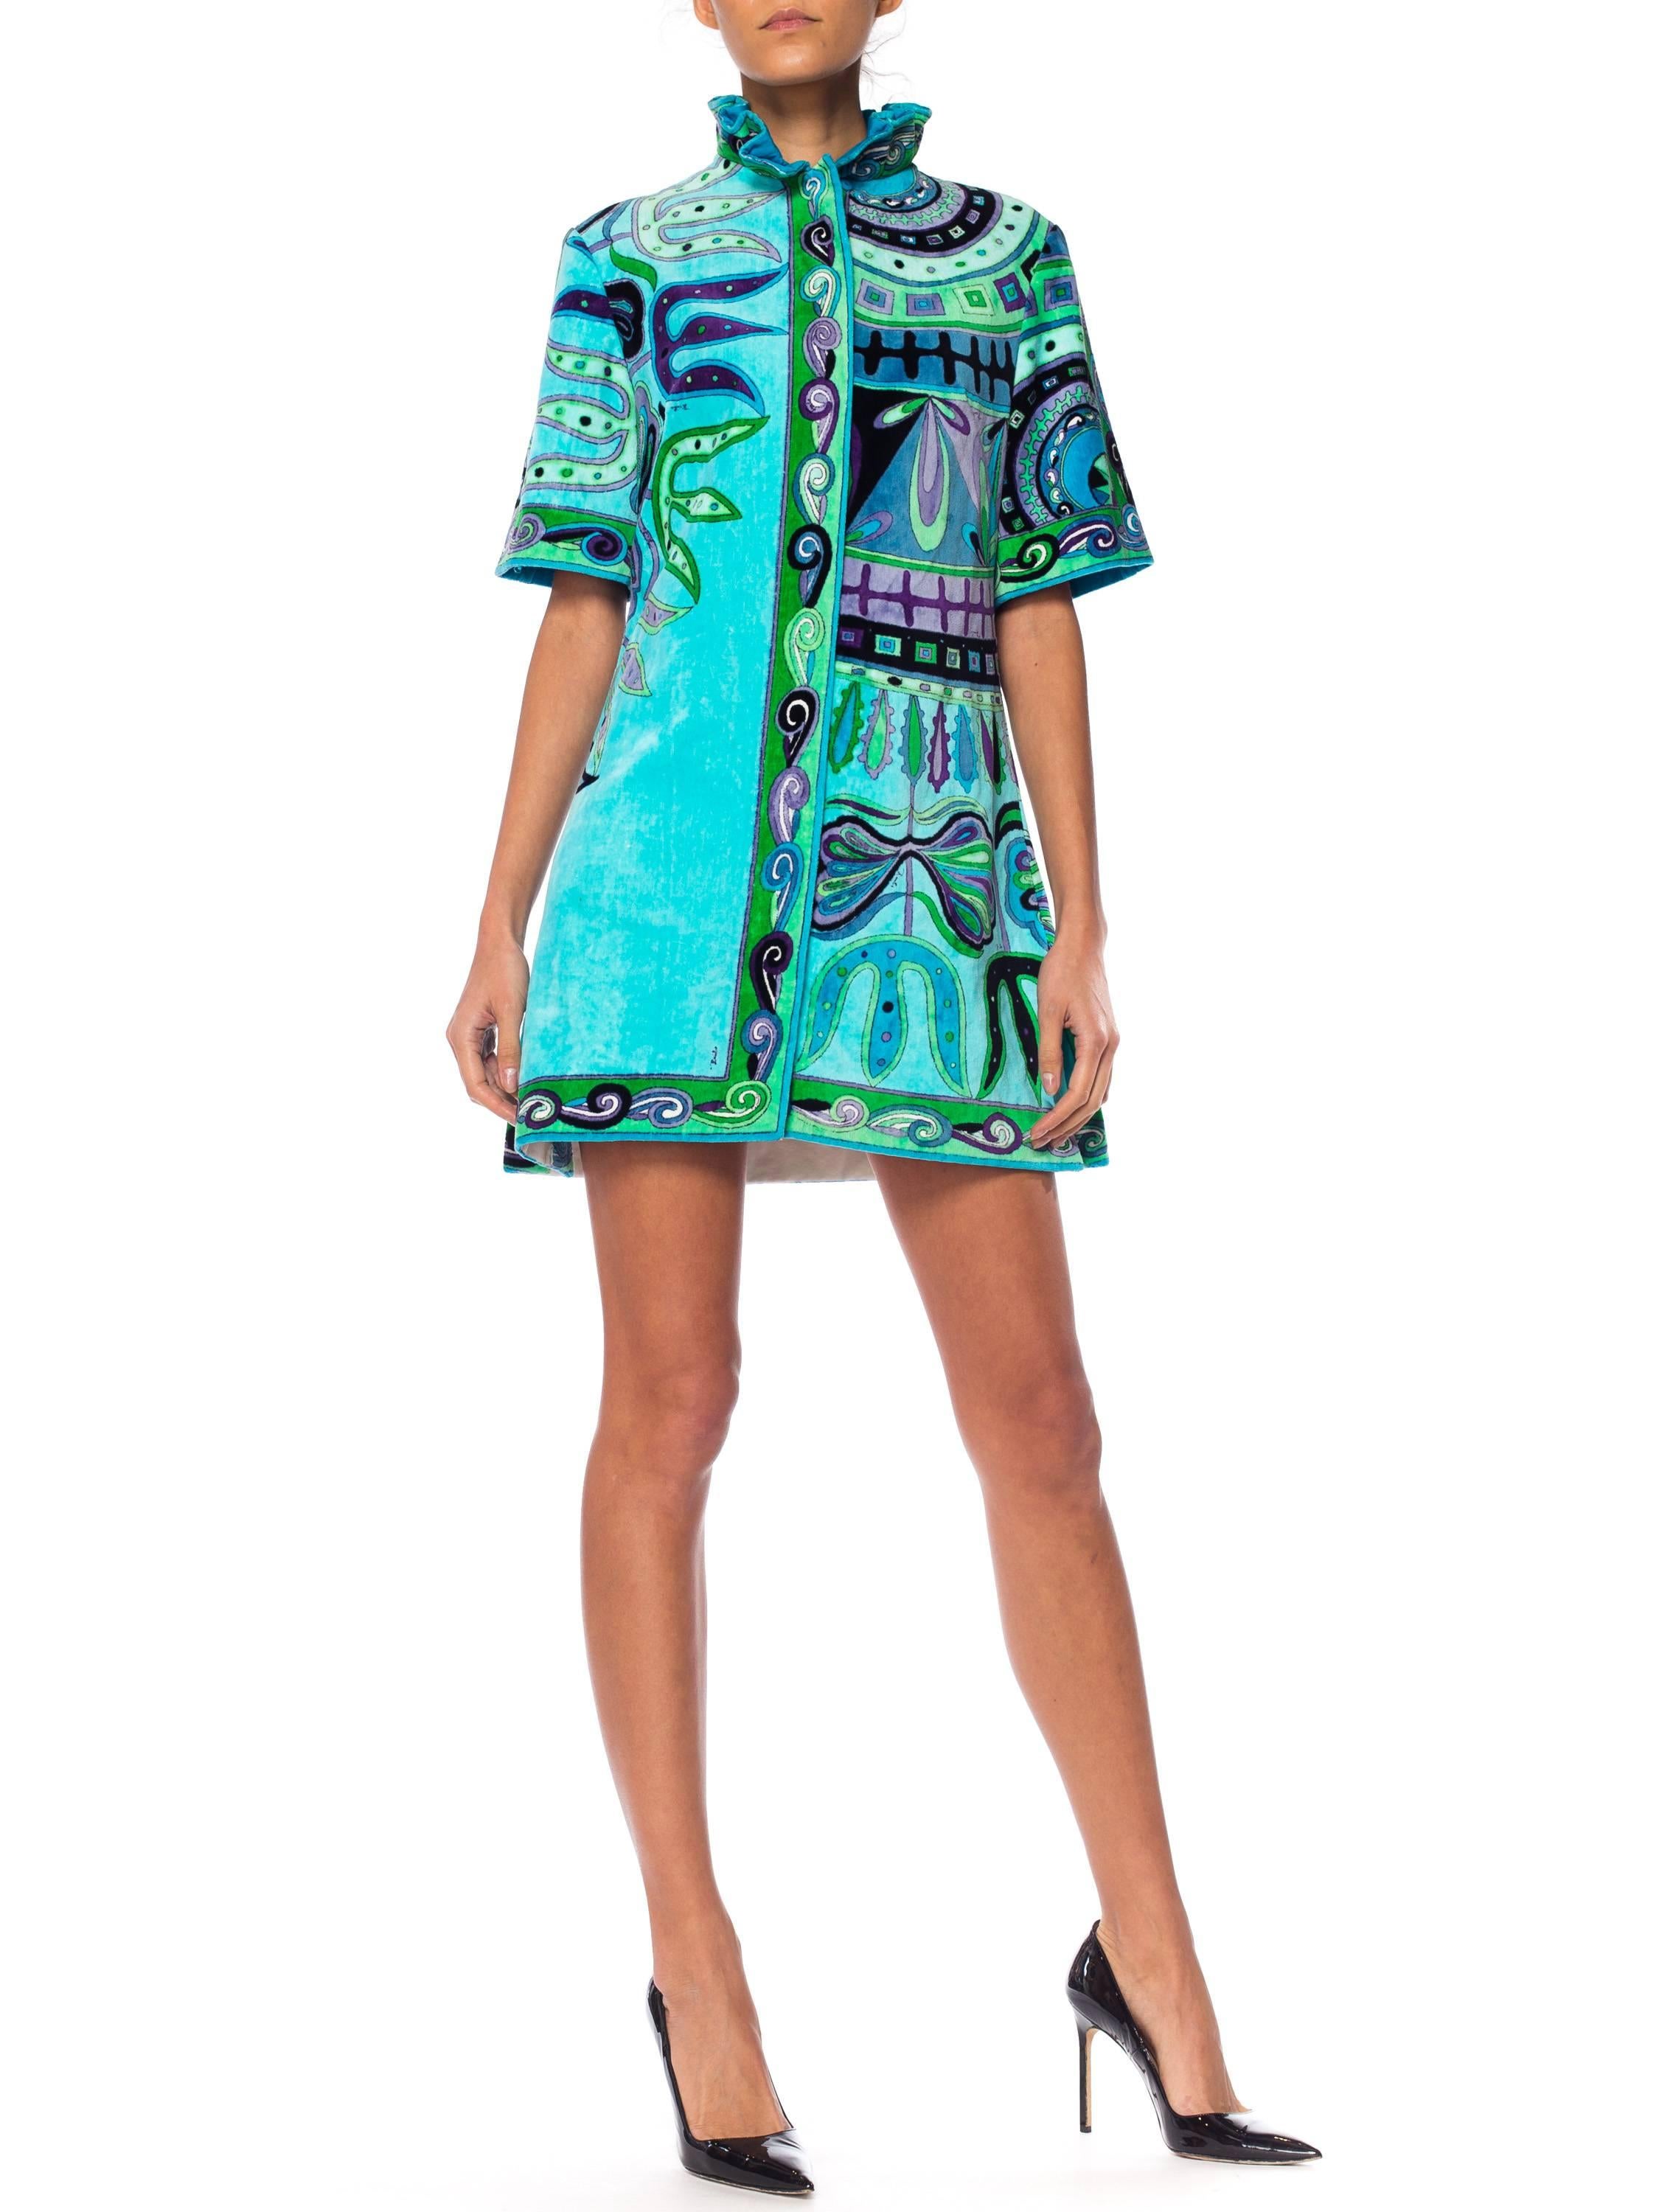 Perfect for throwing on over your bikini or for wearing after the shower. A fun dress too on its own worn with white shorts and flats for summer cocktails. Zips all the way open down the front and can be worn as a long beach coverup as well. Tagged